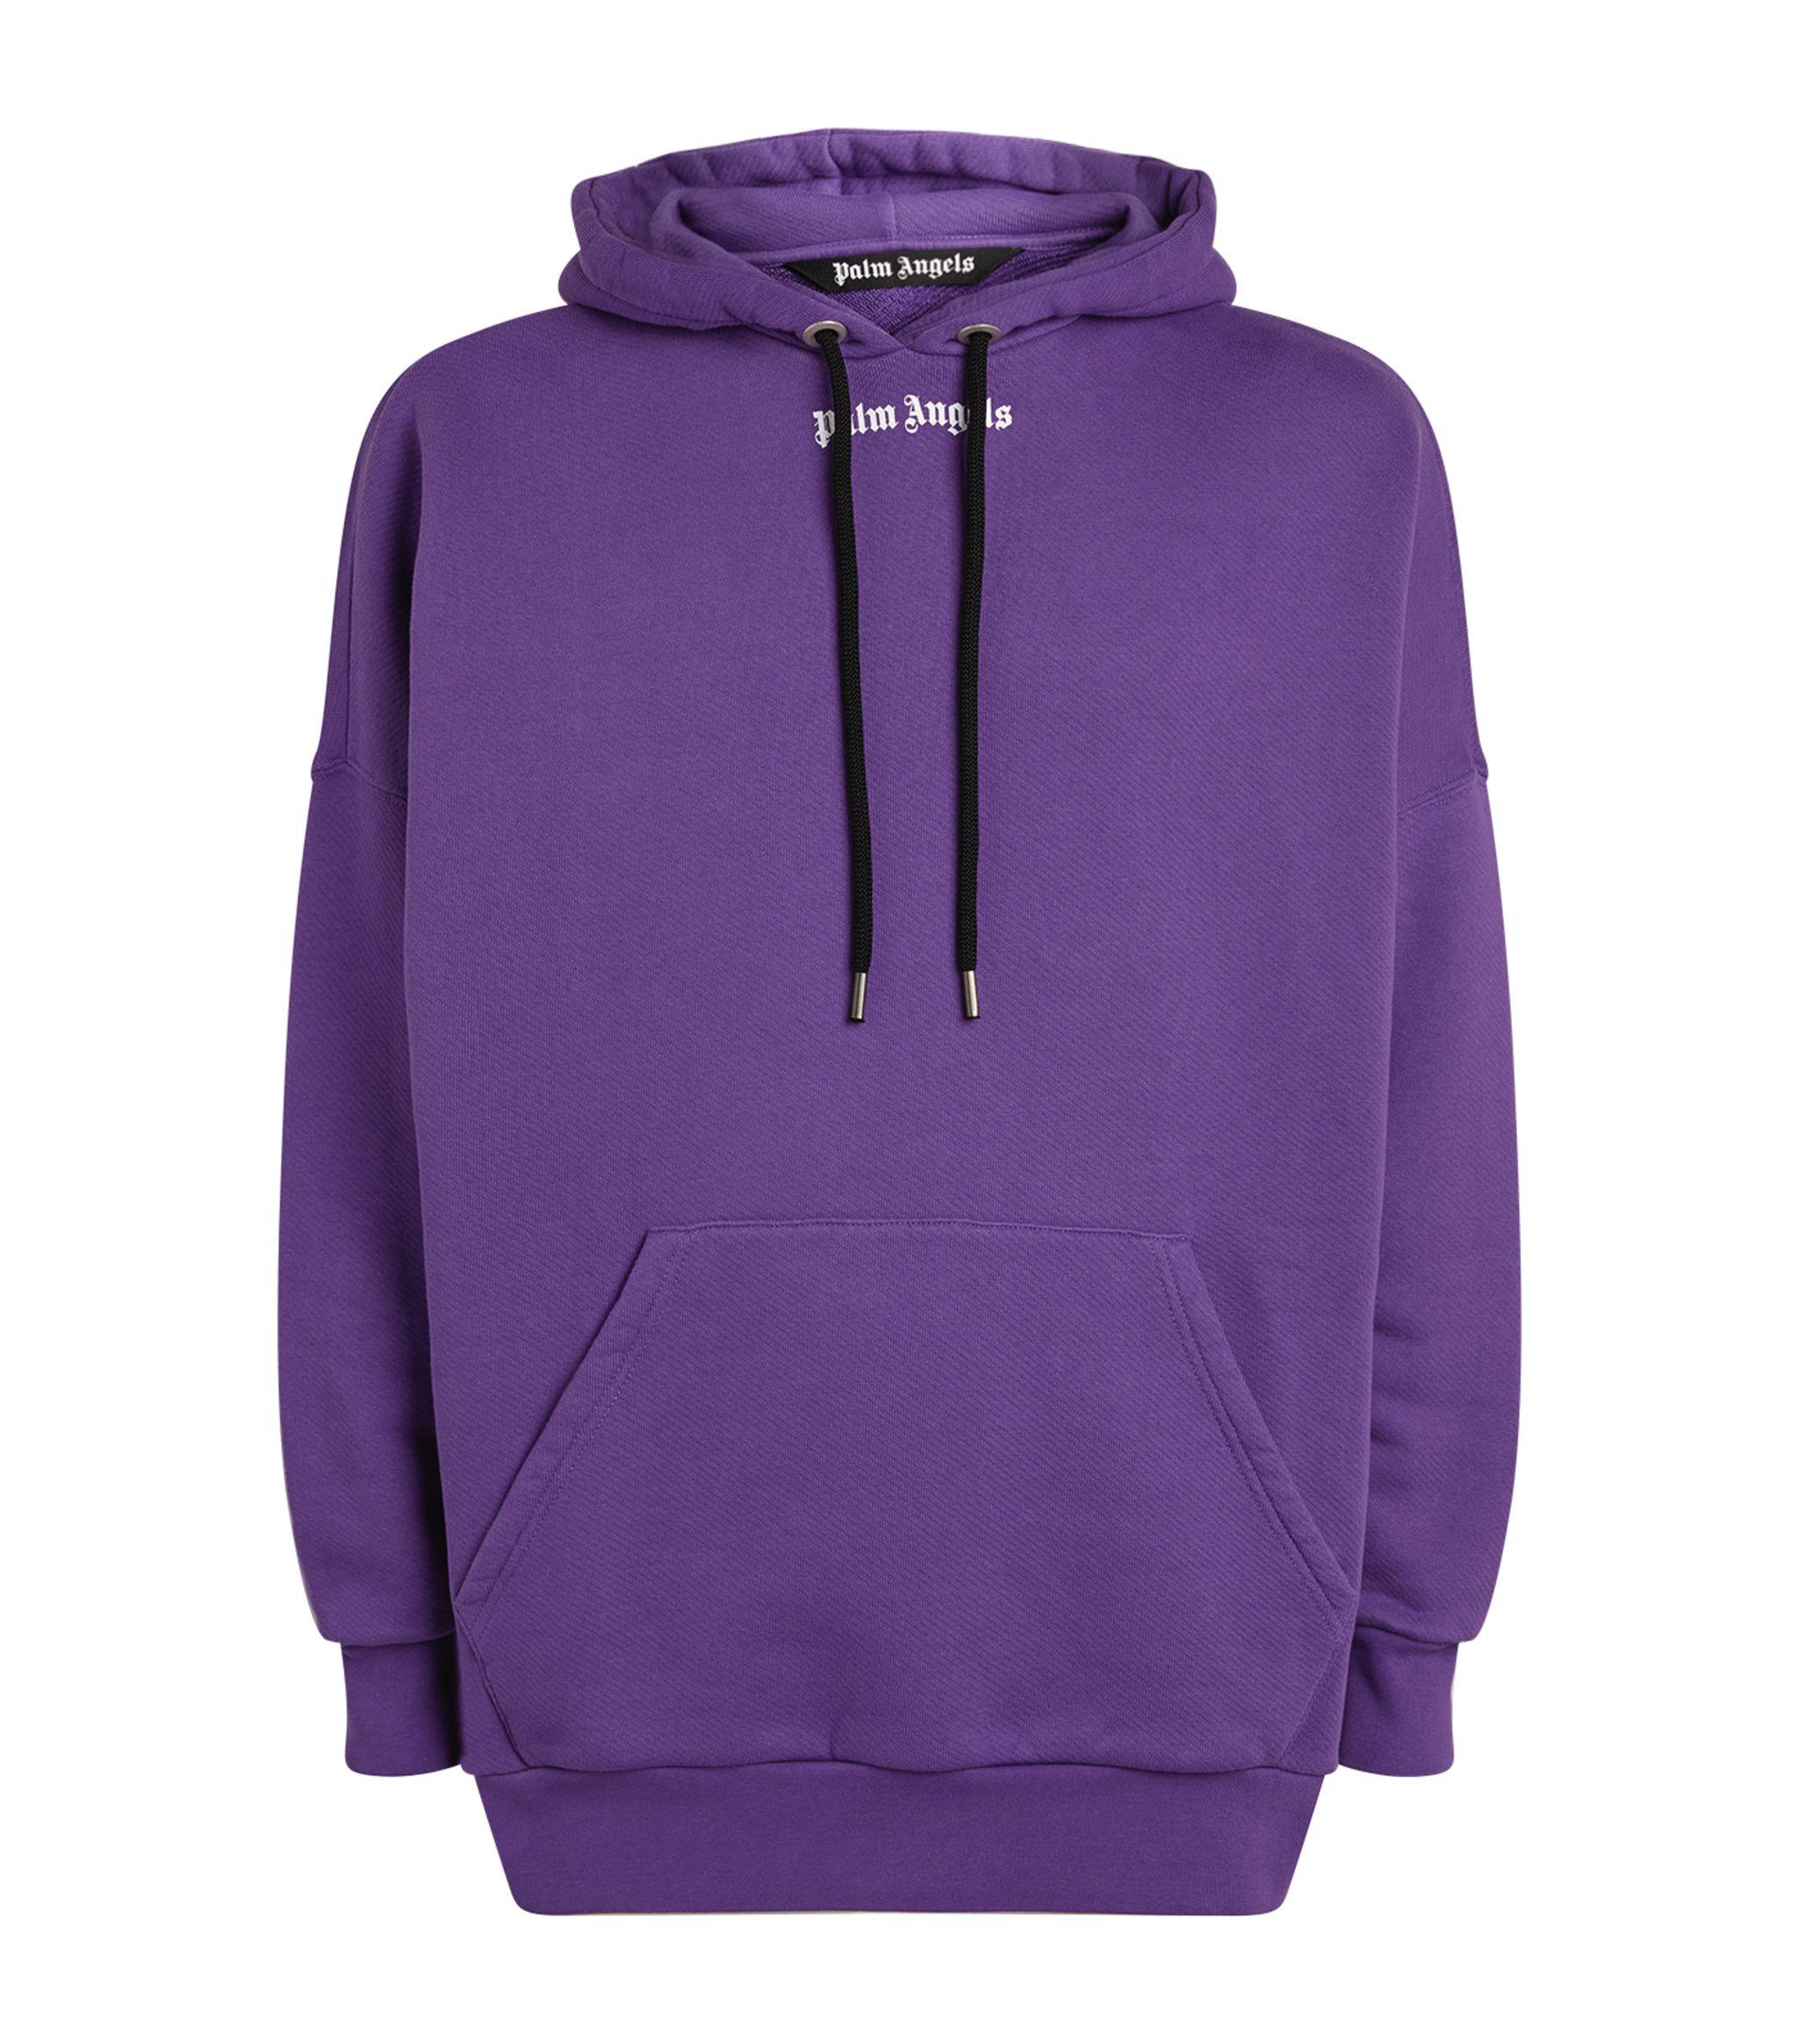 Palm Angels Cotton Oversized Logo Hoodie in Purple for Men - Lyst